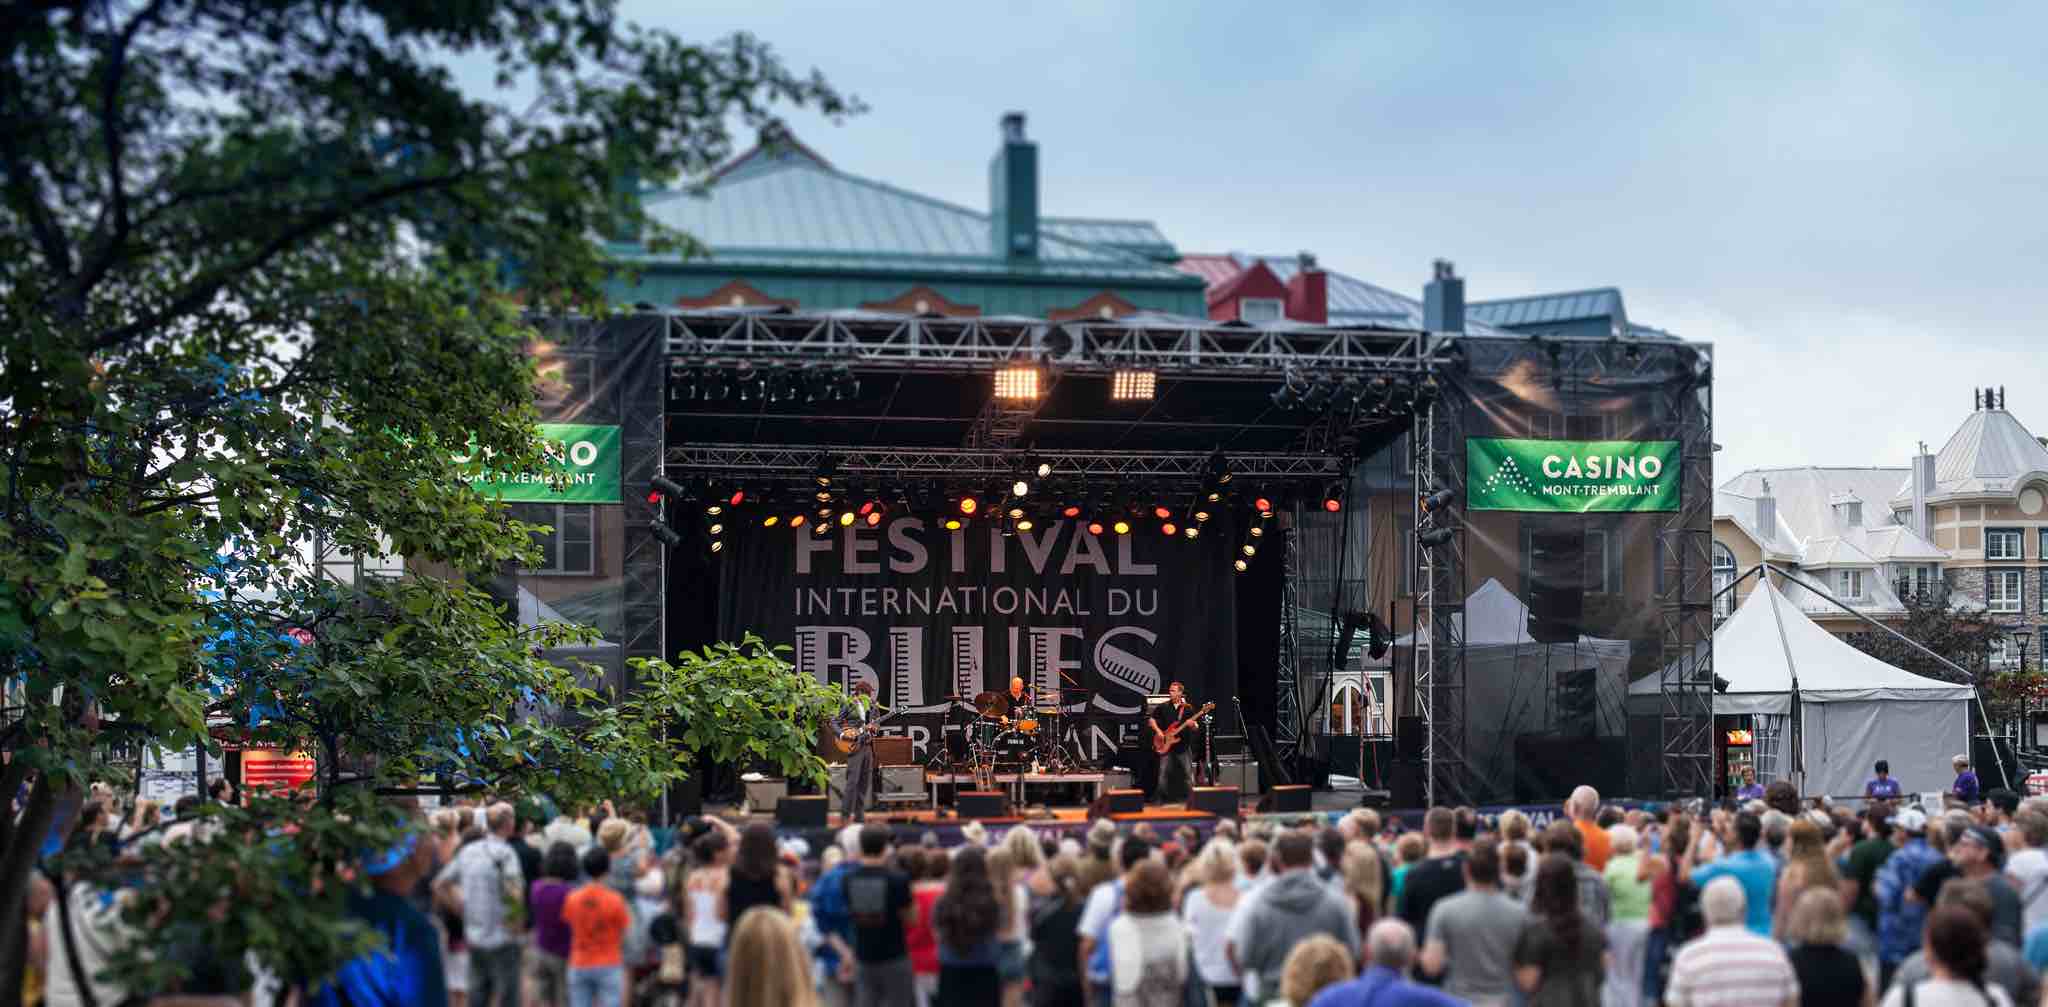 Fun things to do in Mont-Tremblant include festivals and concerts